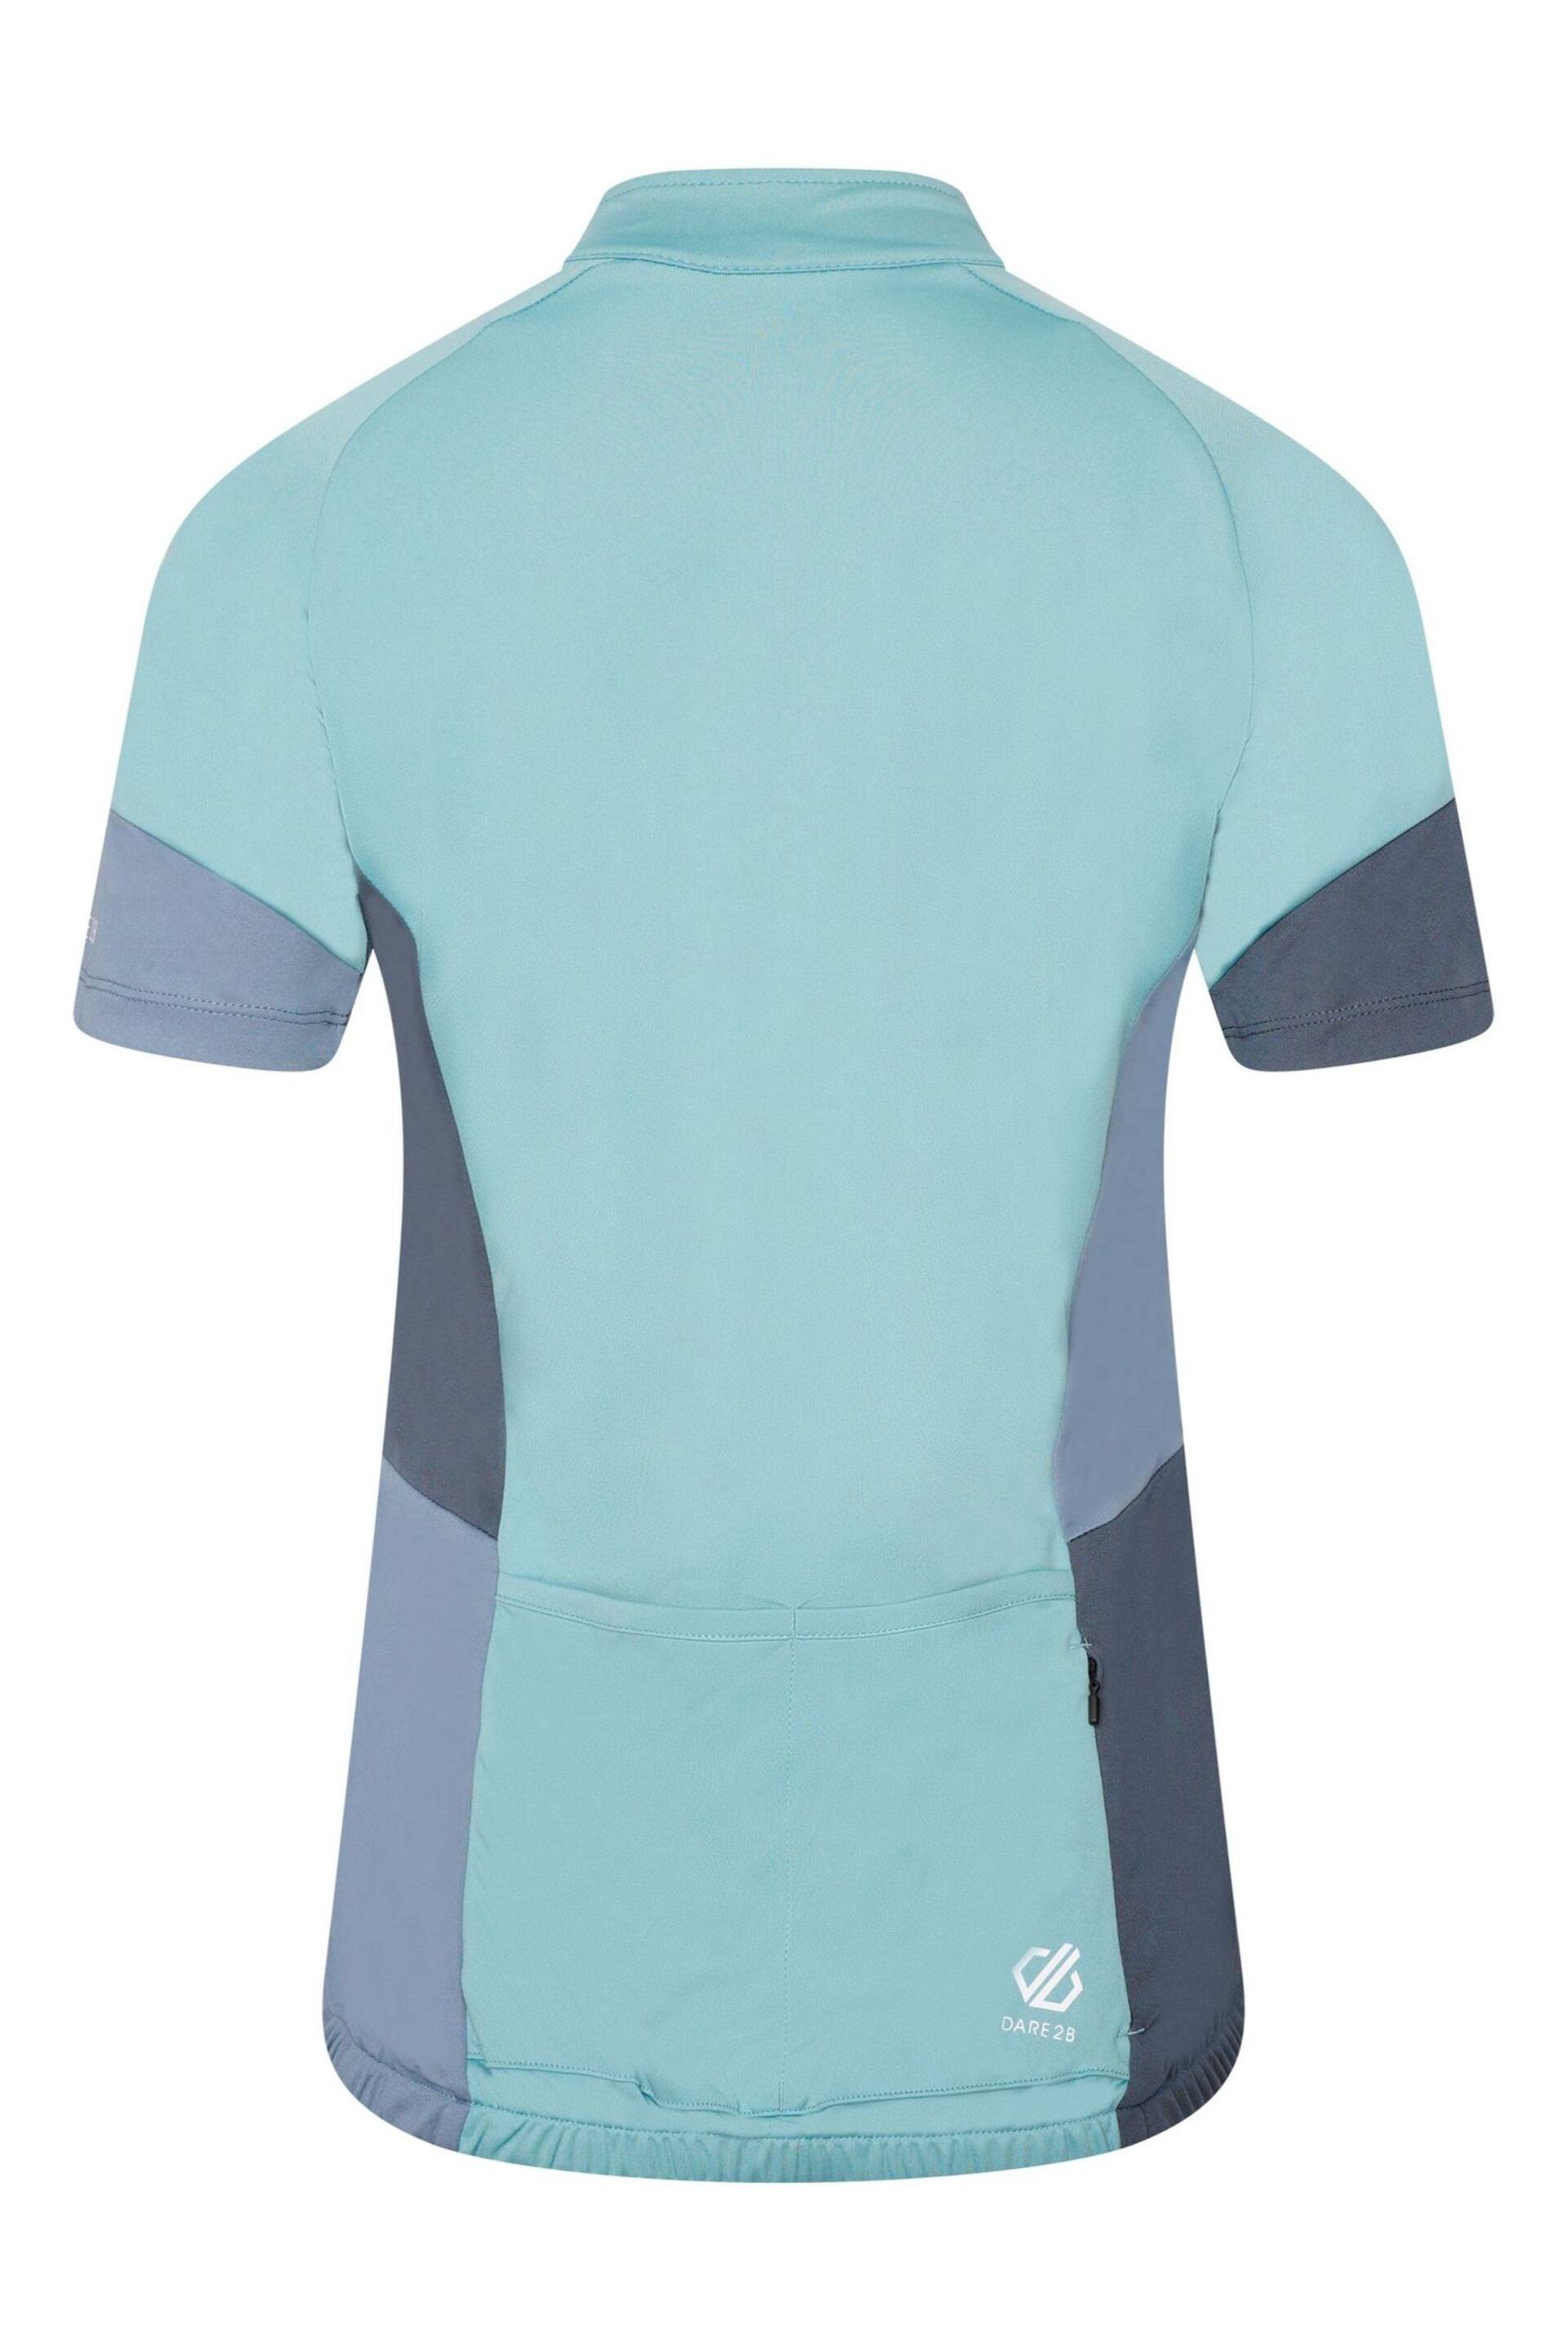 Dare 2b Compassion II Cycle Jersey - Image 2 of 3